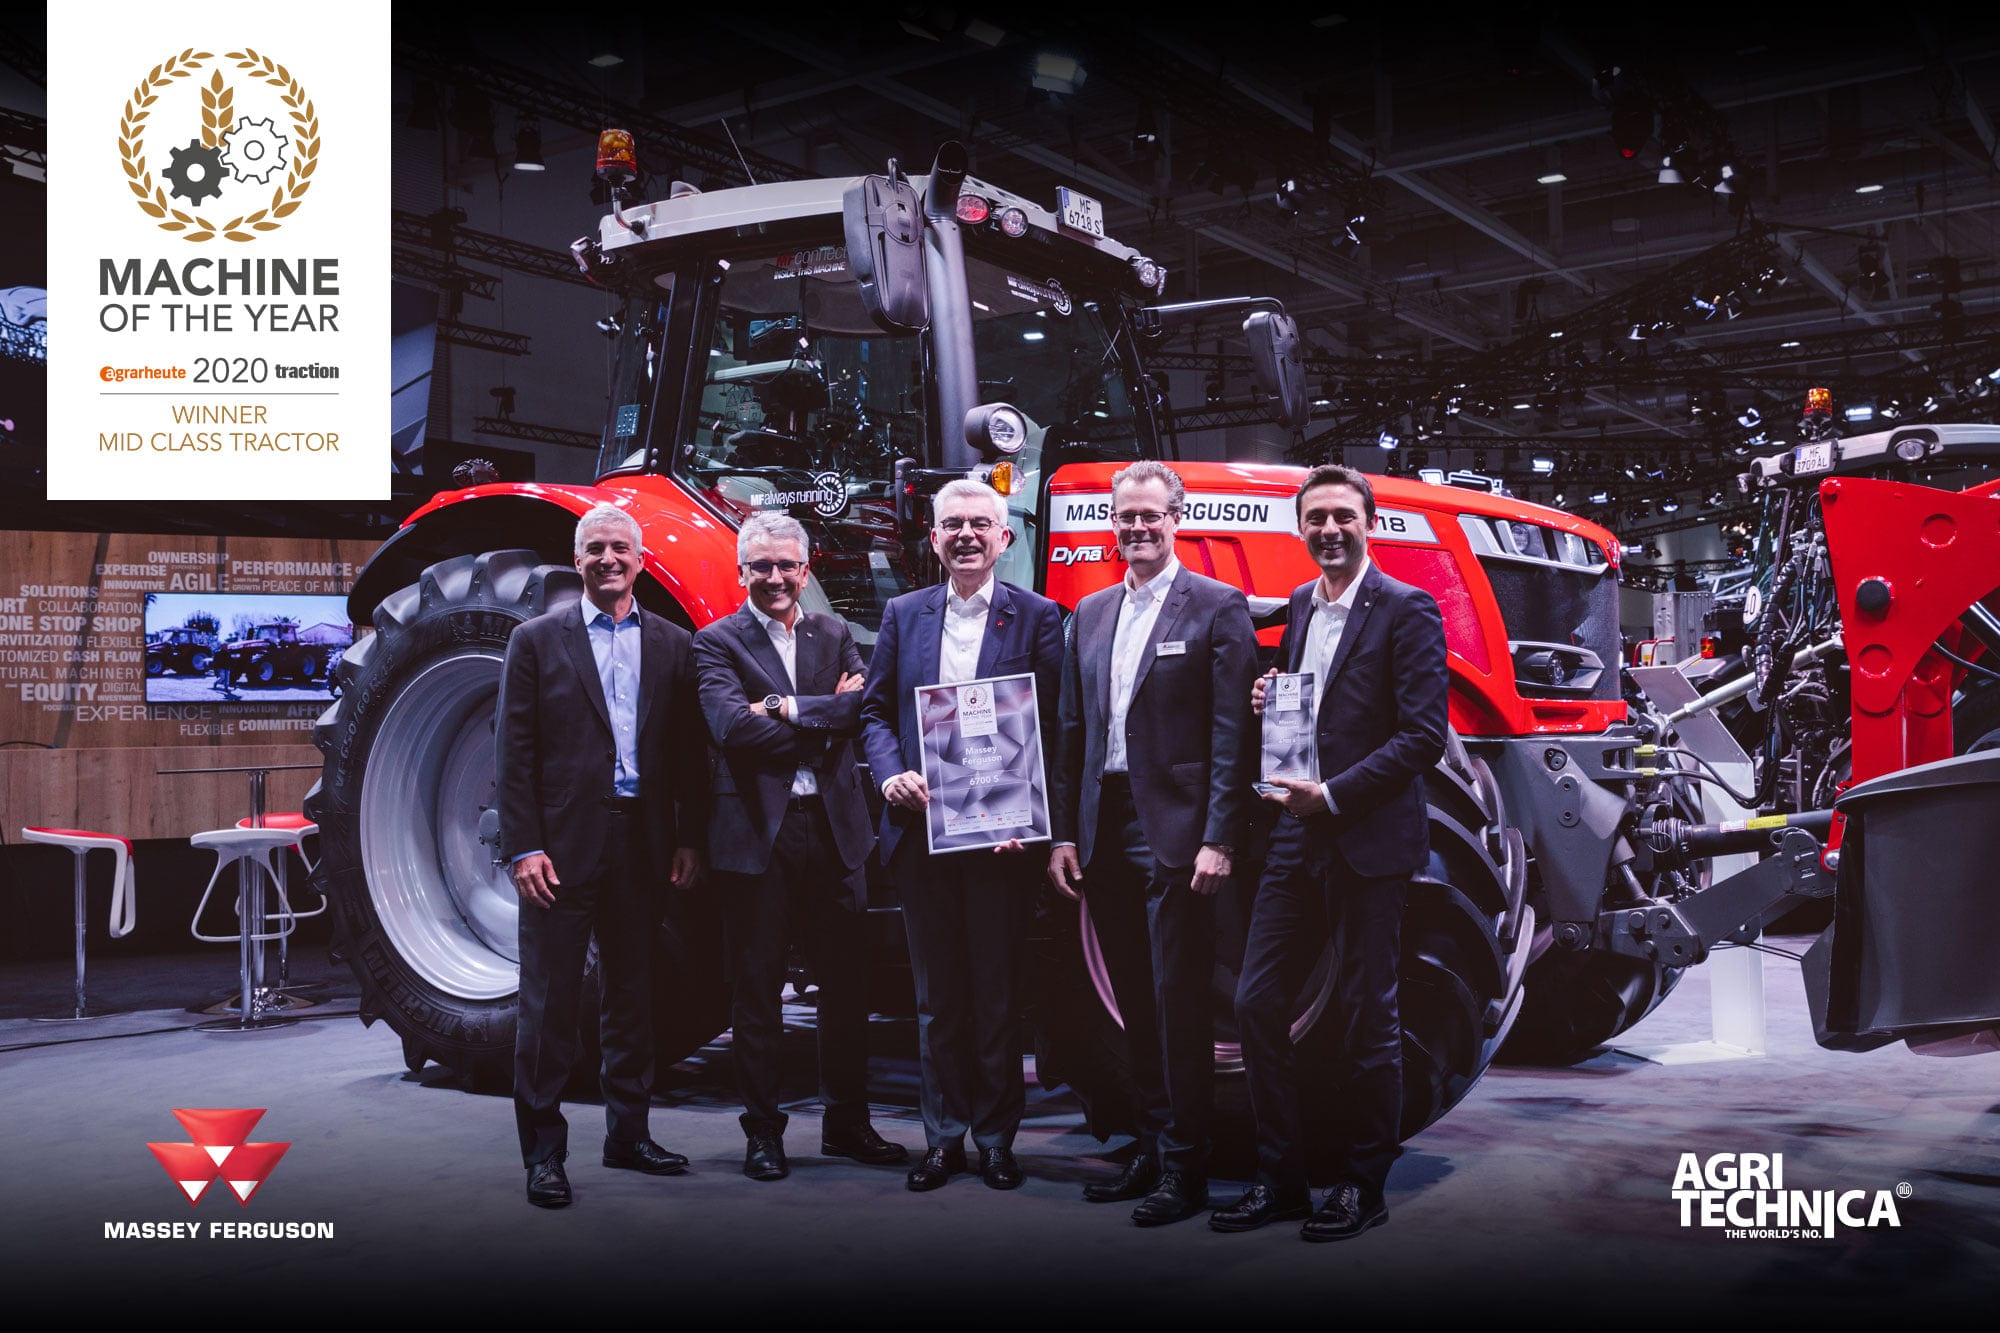 MF 6700 S awarded Machine of the Year 2020